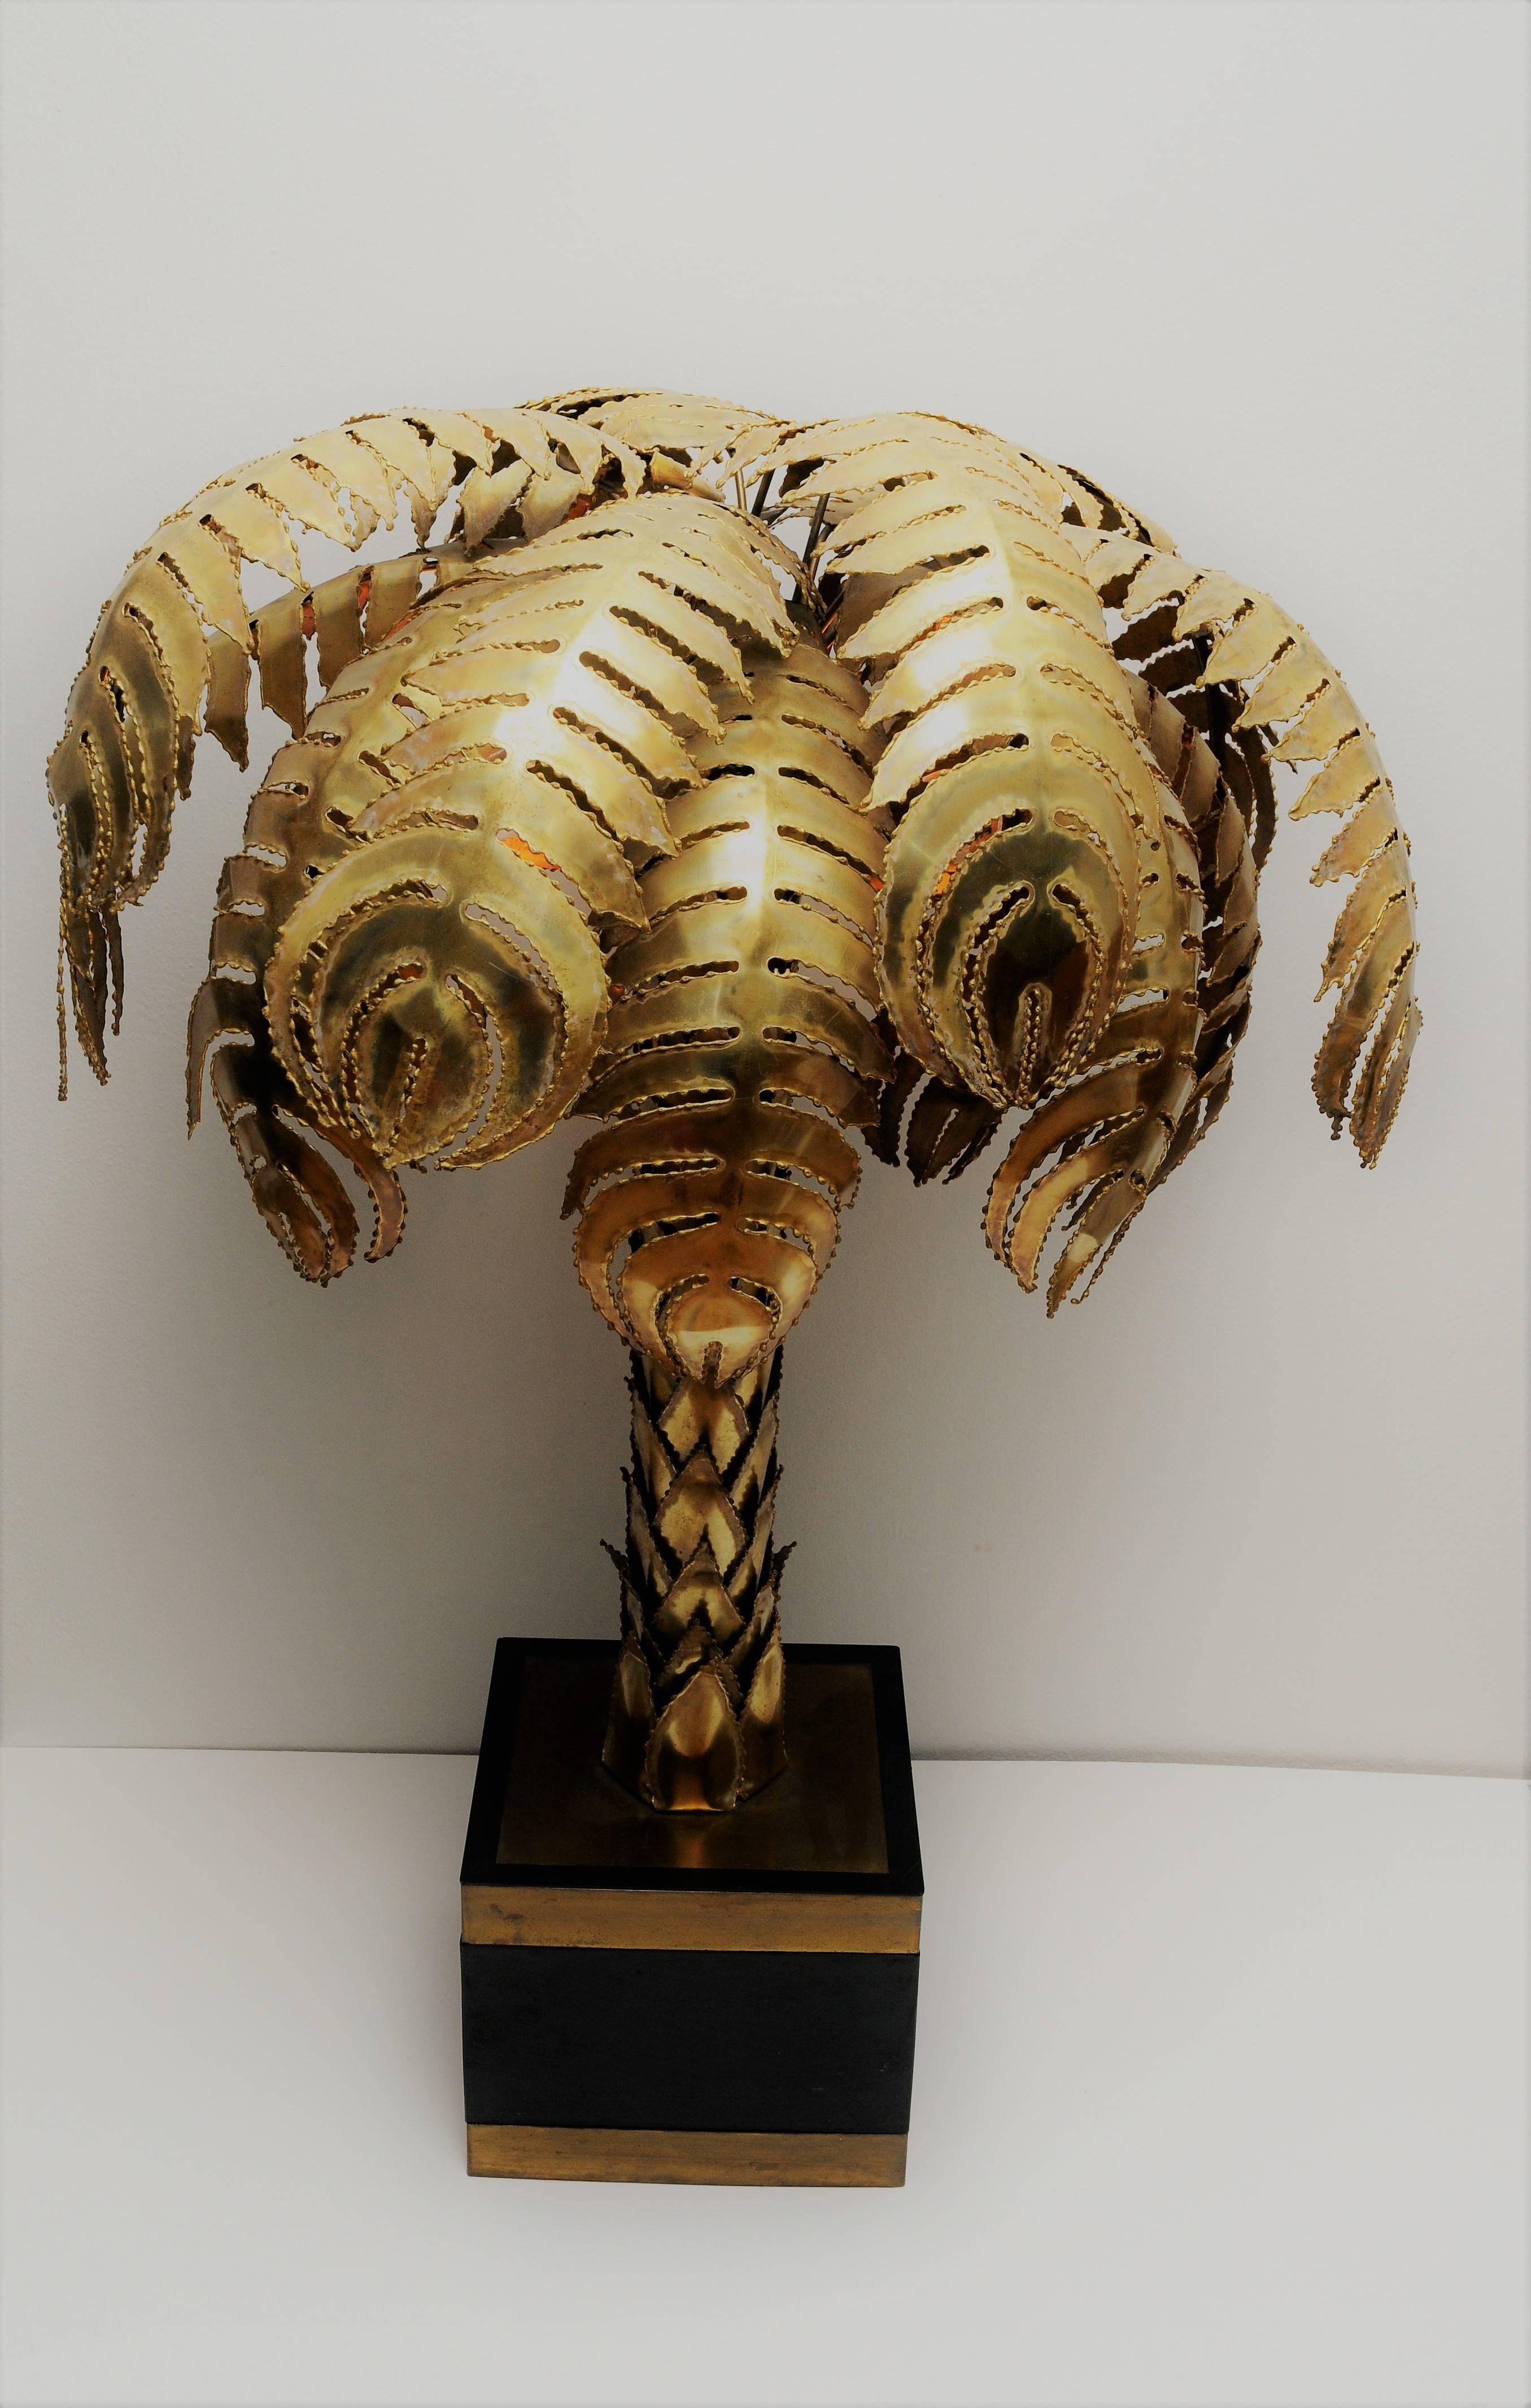 This golden palm tree lamp dates from the 1960s and was made by Maison Jansen. It requires two bulbs, has a brass and black ABS base.

Maison Jansen (House of Jansen) was a Paris-based interior decoration office founded in 1880 by Dutch-born